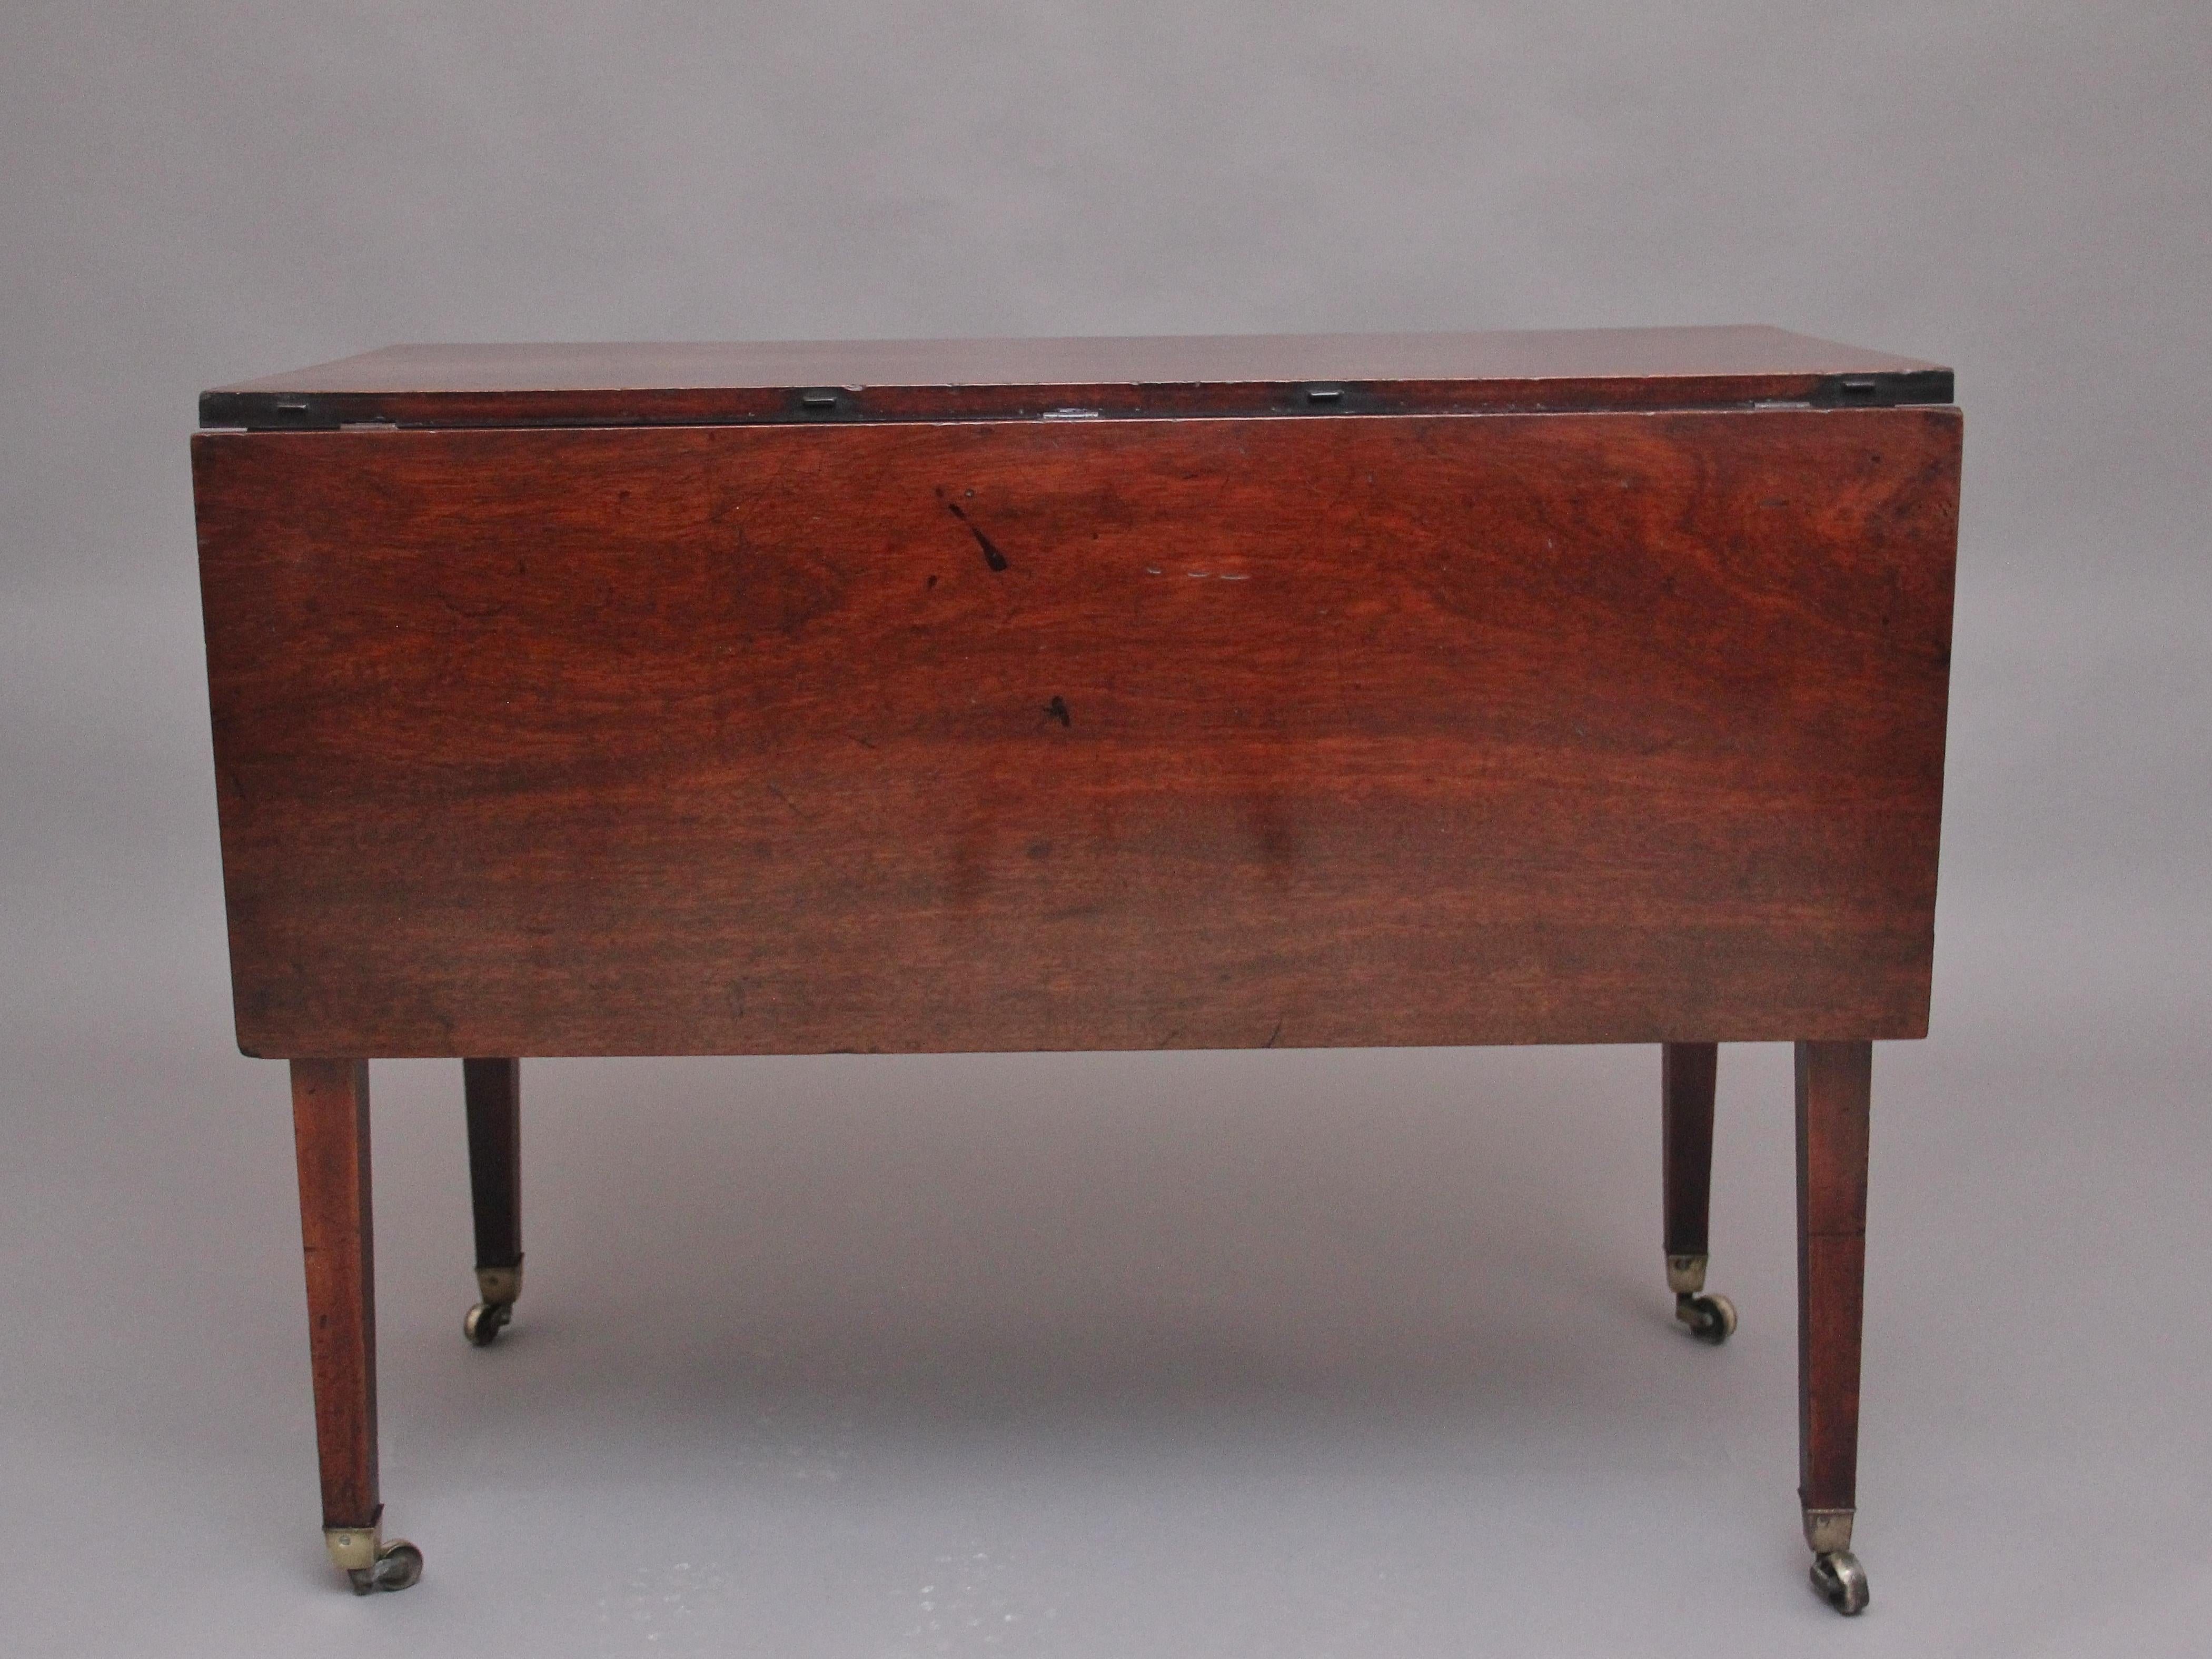 Rare and Unique 18th Century Mahogany Side Table In Good Condition For Sale In Martlesham, GB